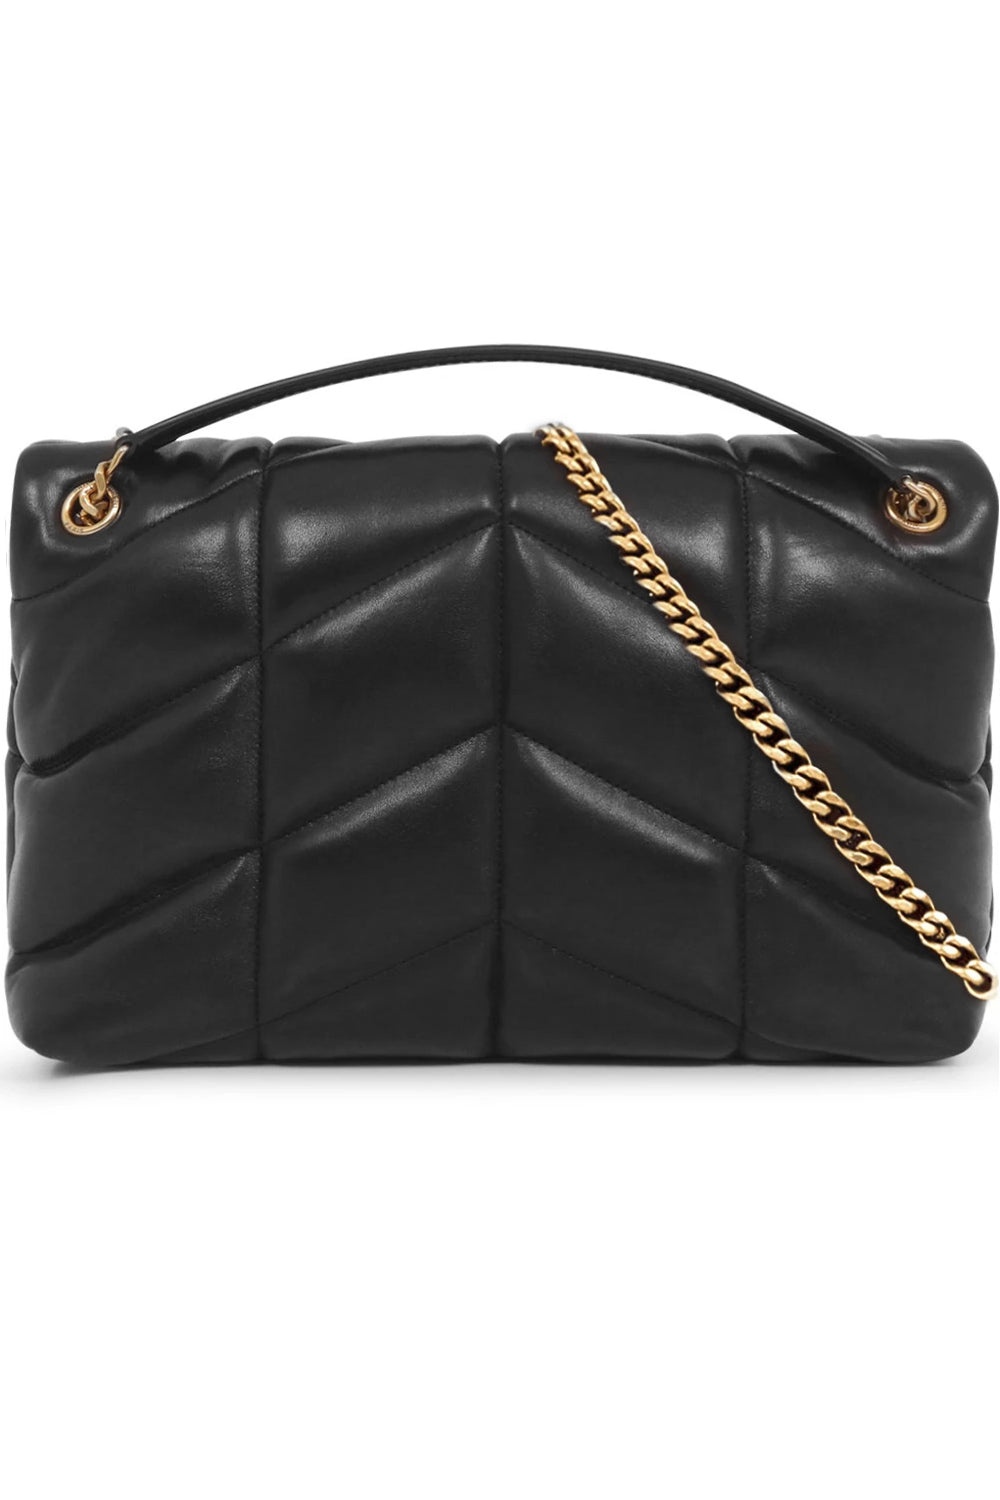 LOULOU SMALL PUFFER BAG | BLACK/GOLD - 2